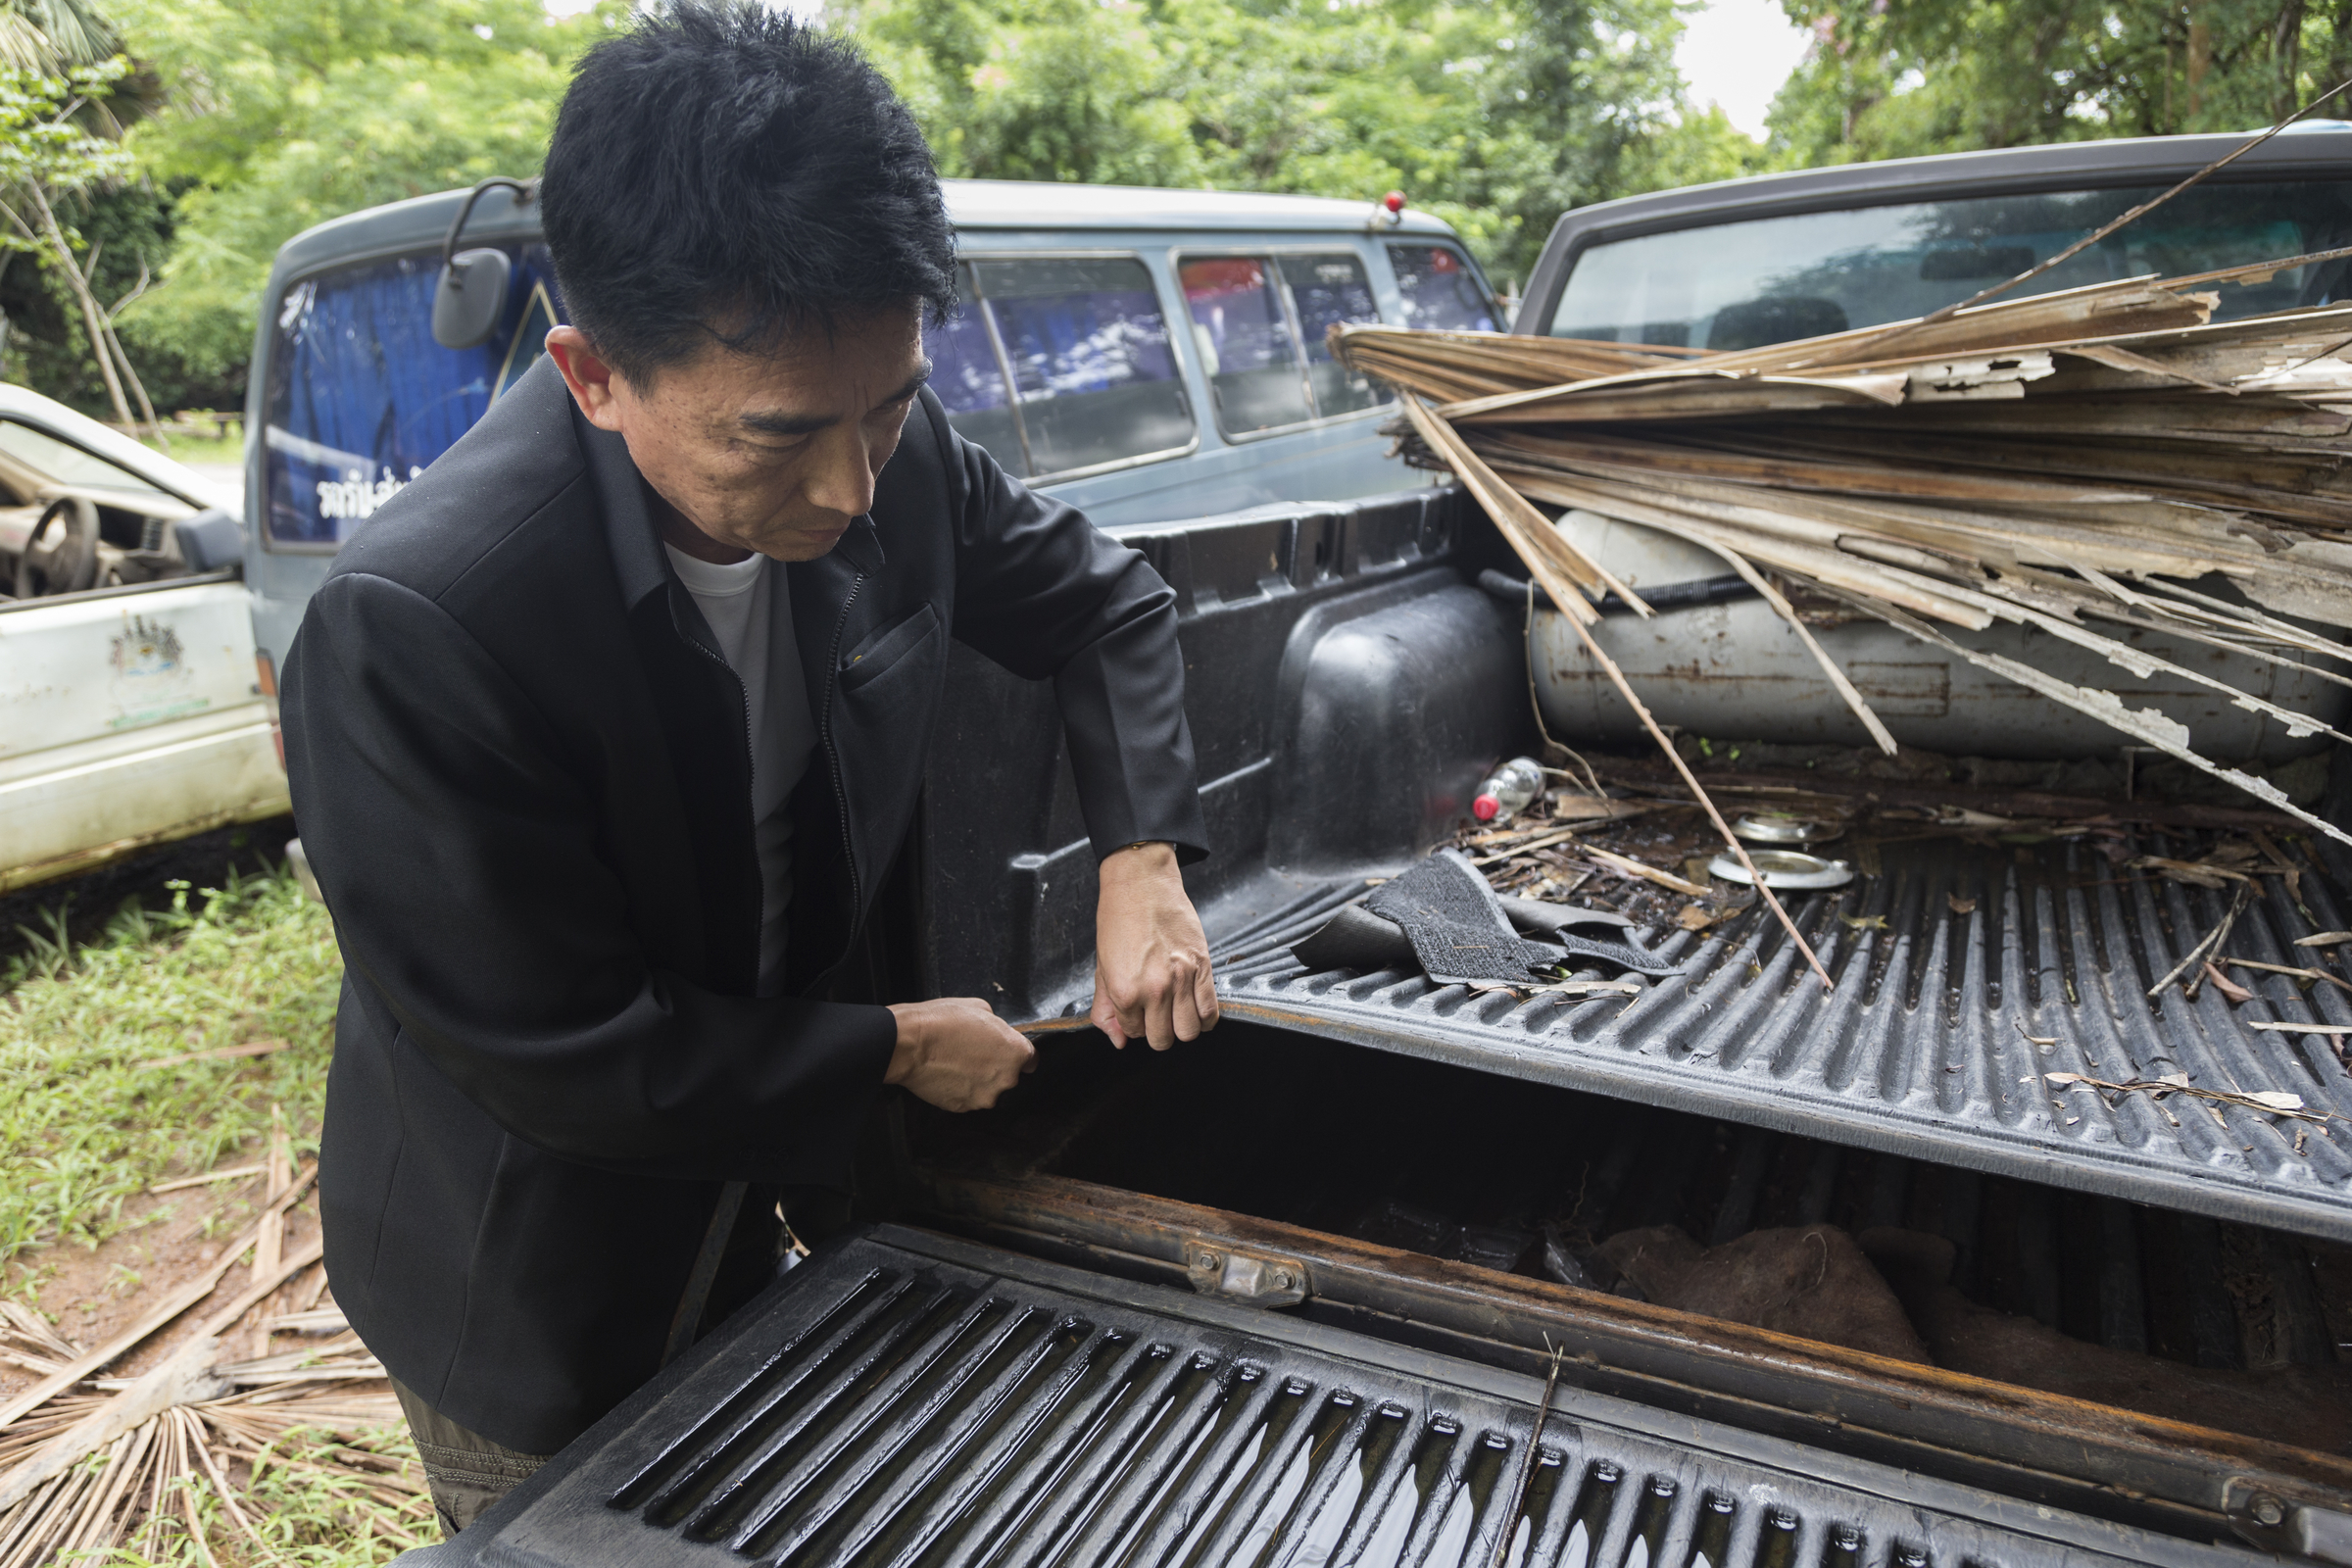 Thap Lan chief Taywin Meesap shows hidden compartment in vehicle used by Siam rosewood poachers